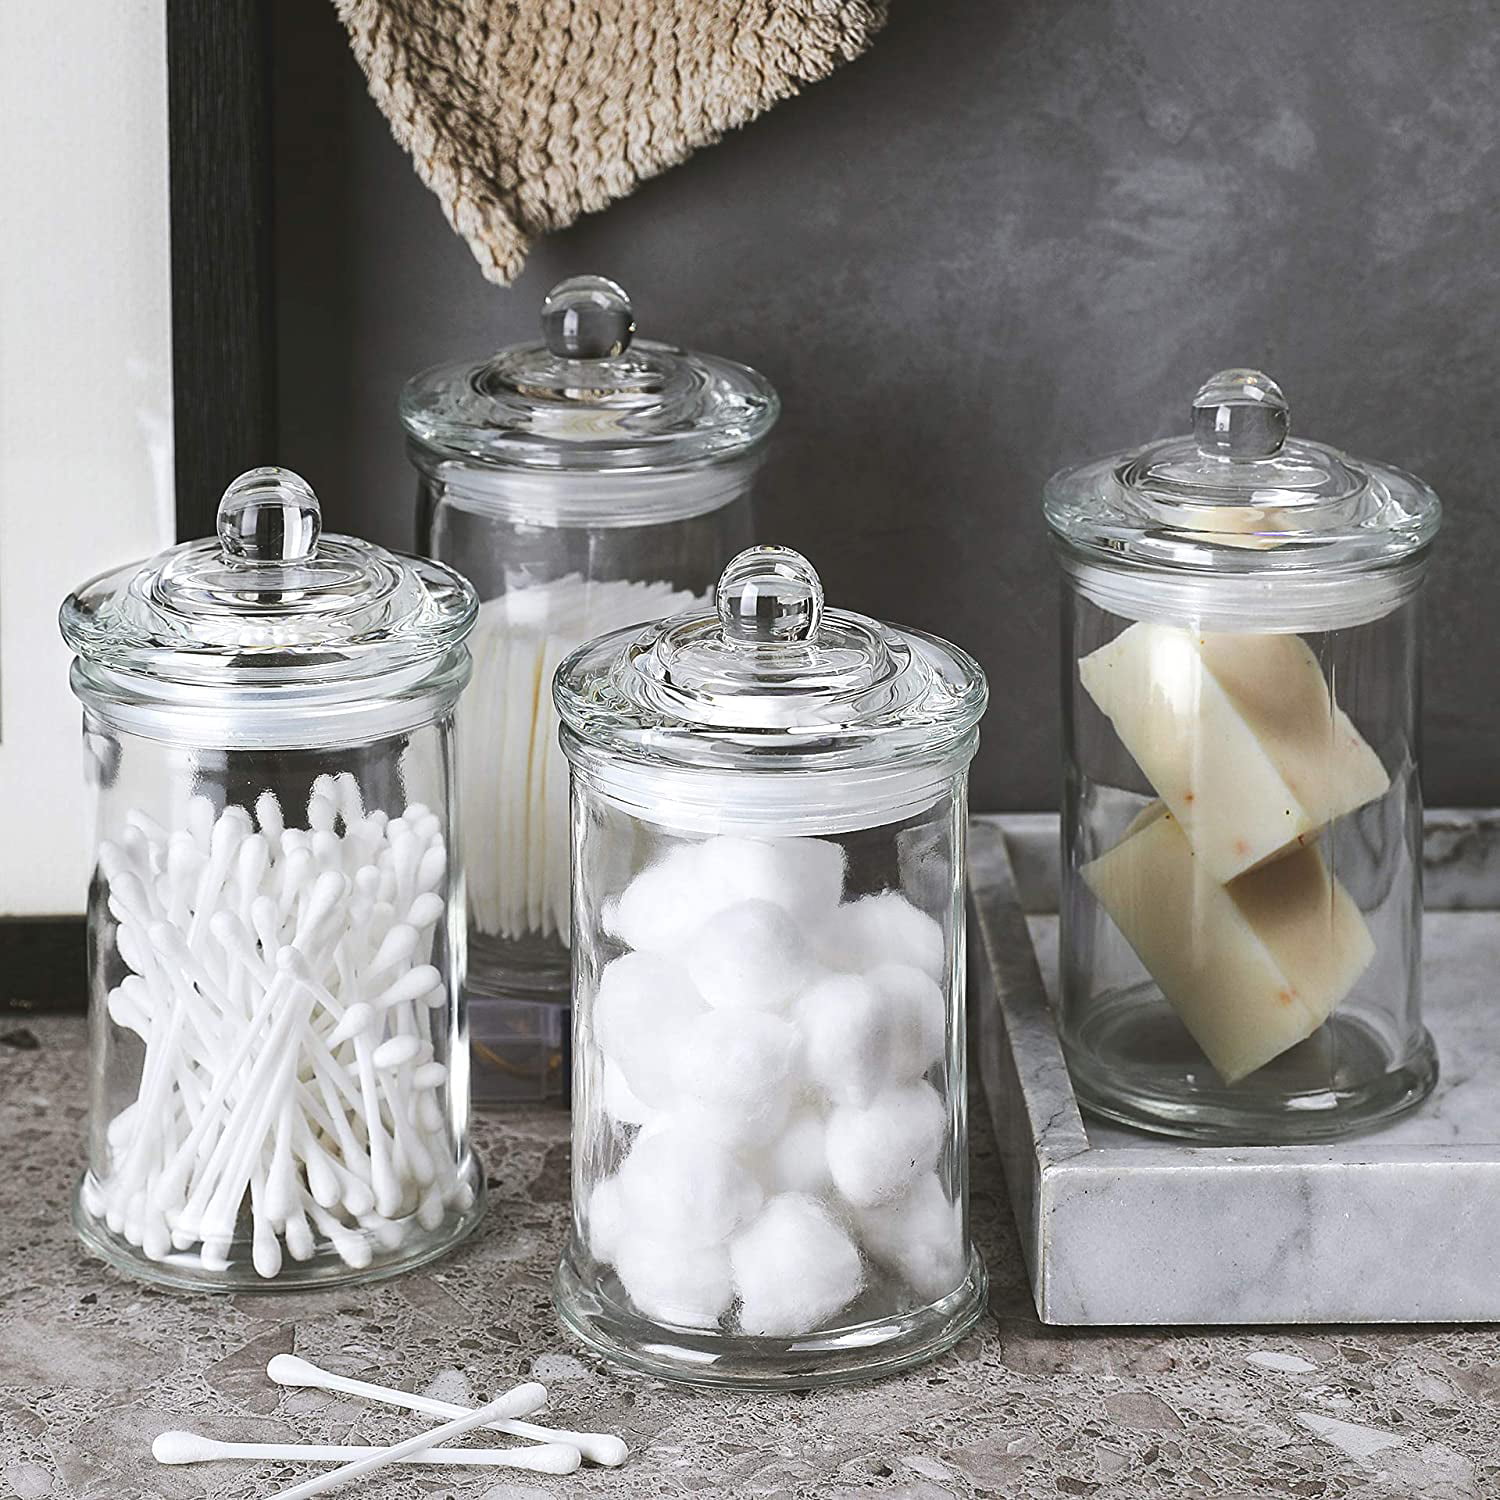 Glass Apothecary Jars with Lids - Set of 3 - Bathroom Storage - Whole  Housewares – RoomDividersNow